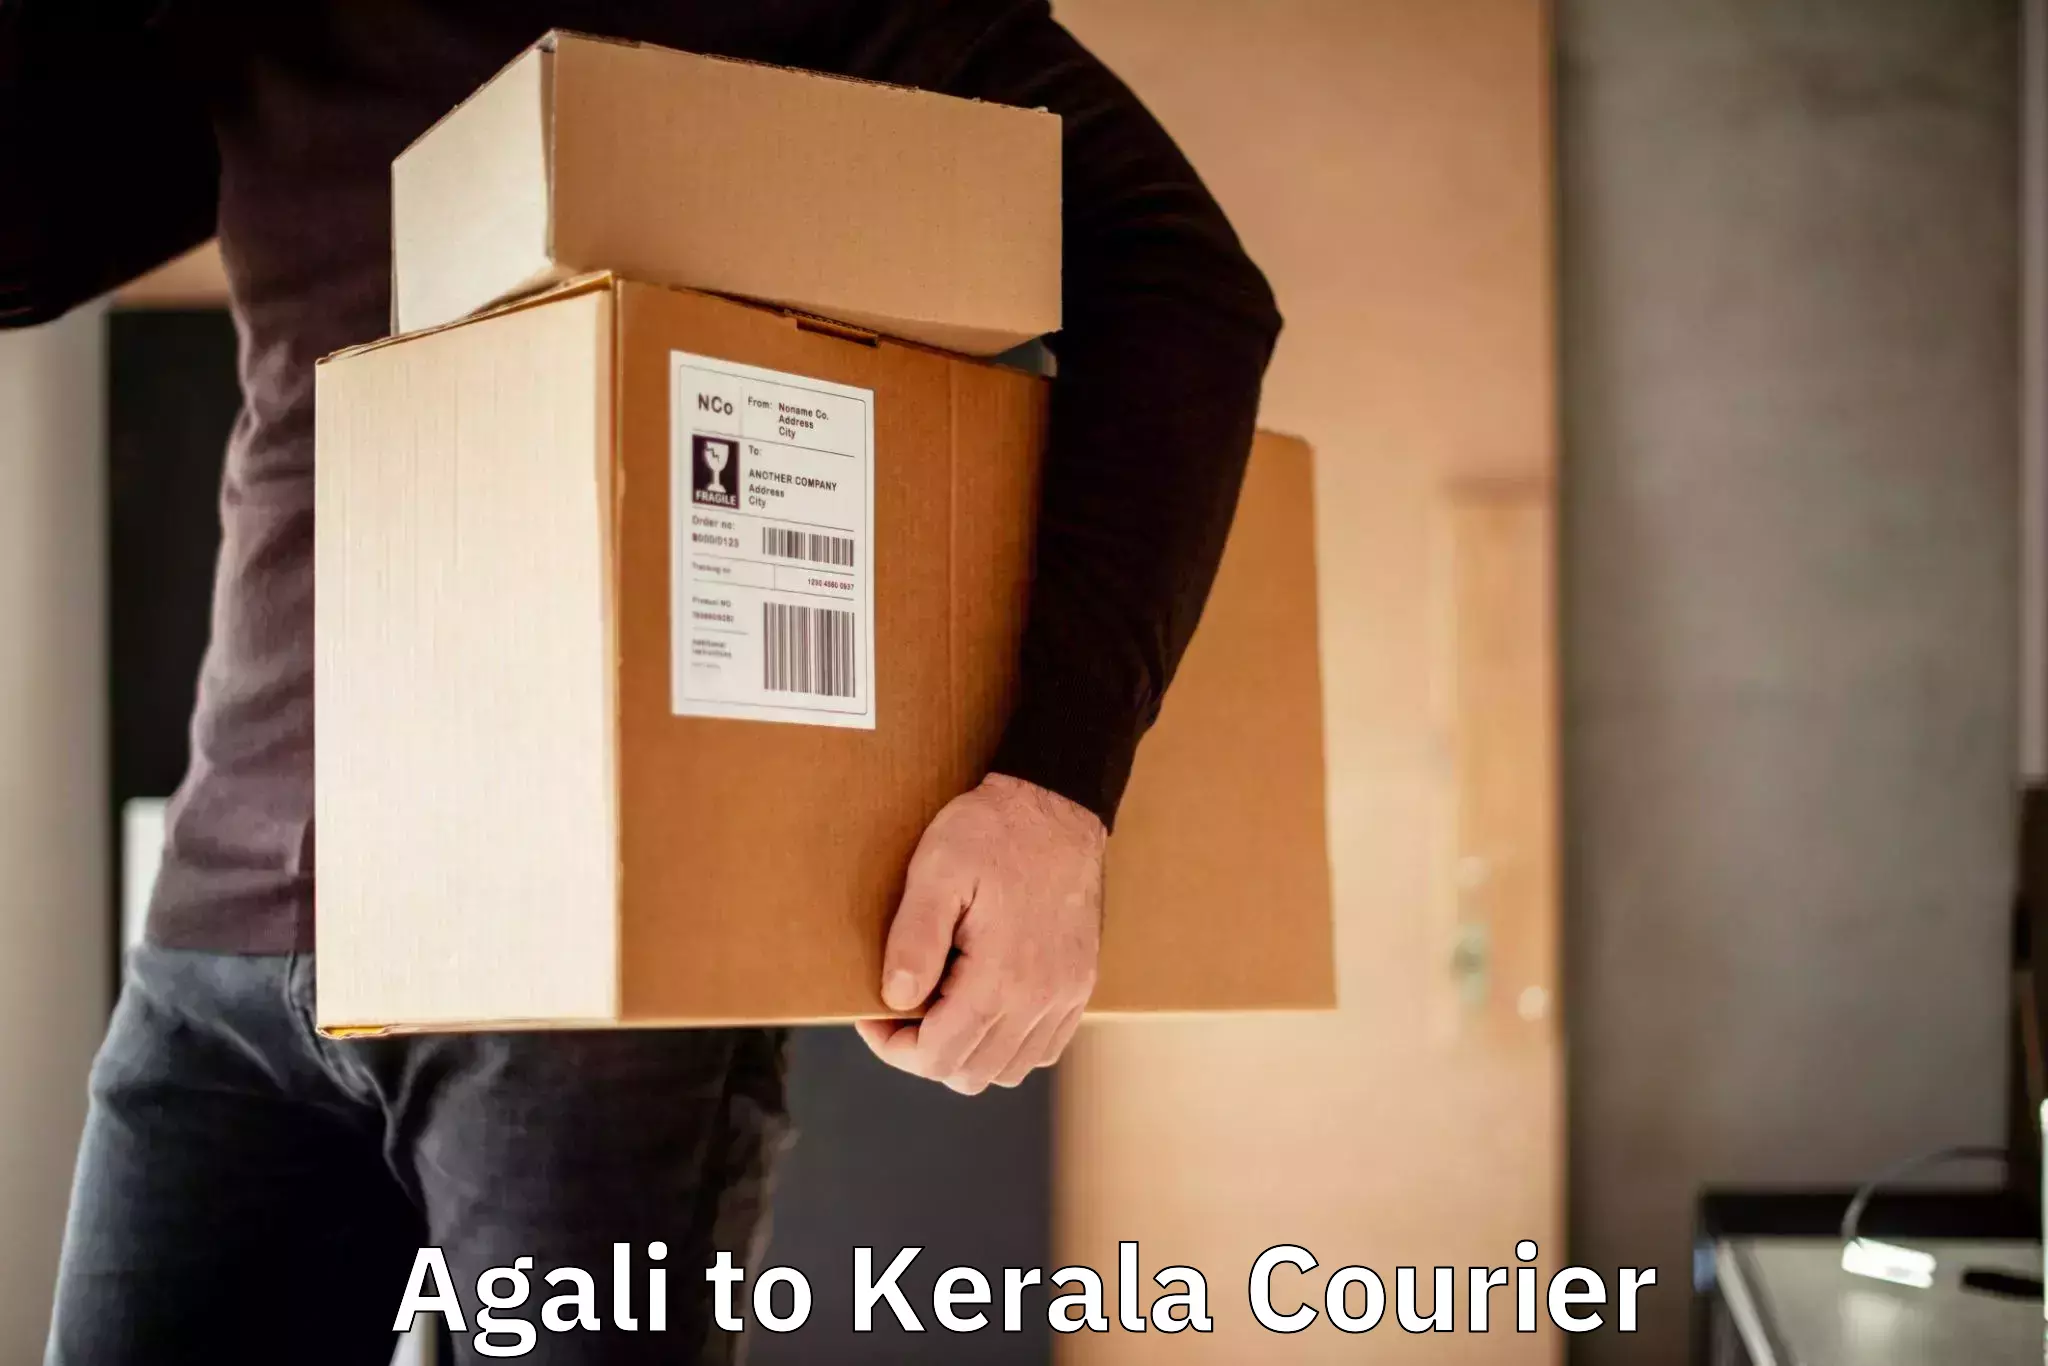 24-hour courier service Agali to Kochi